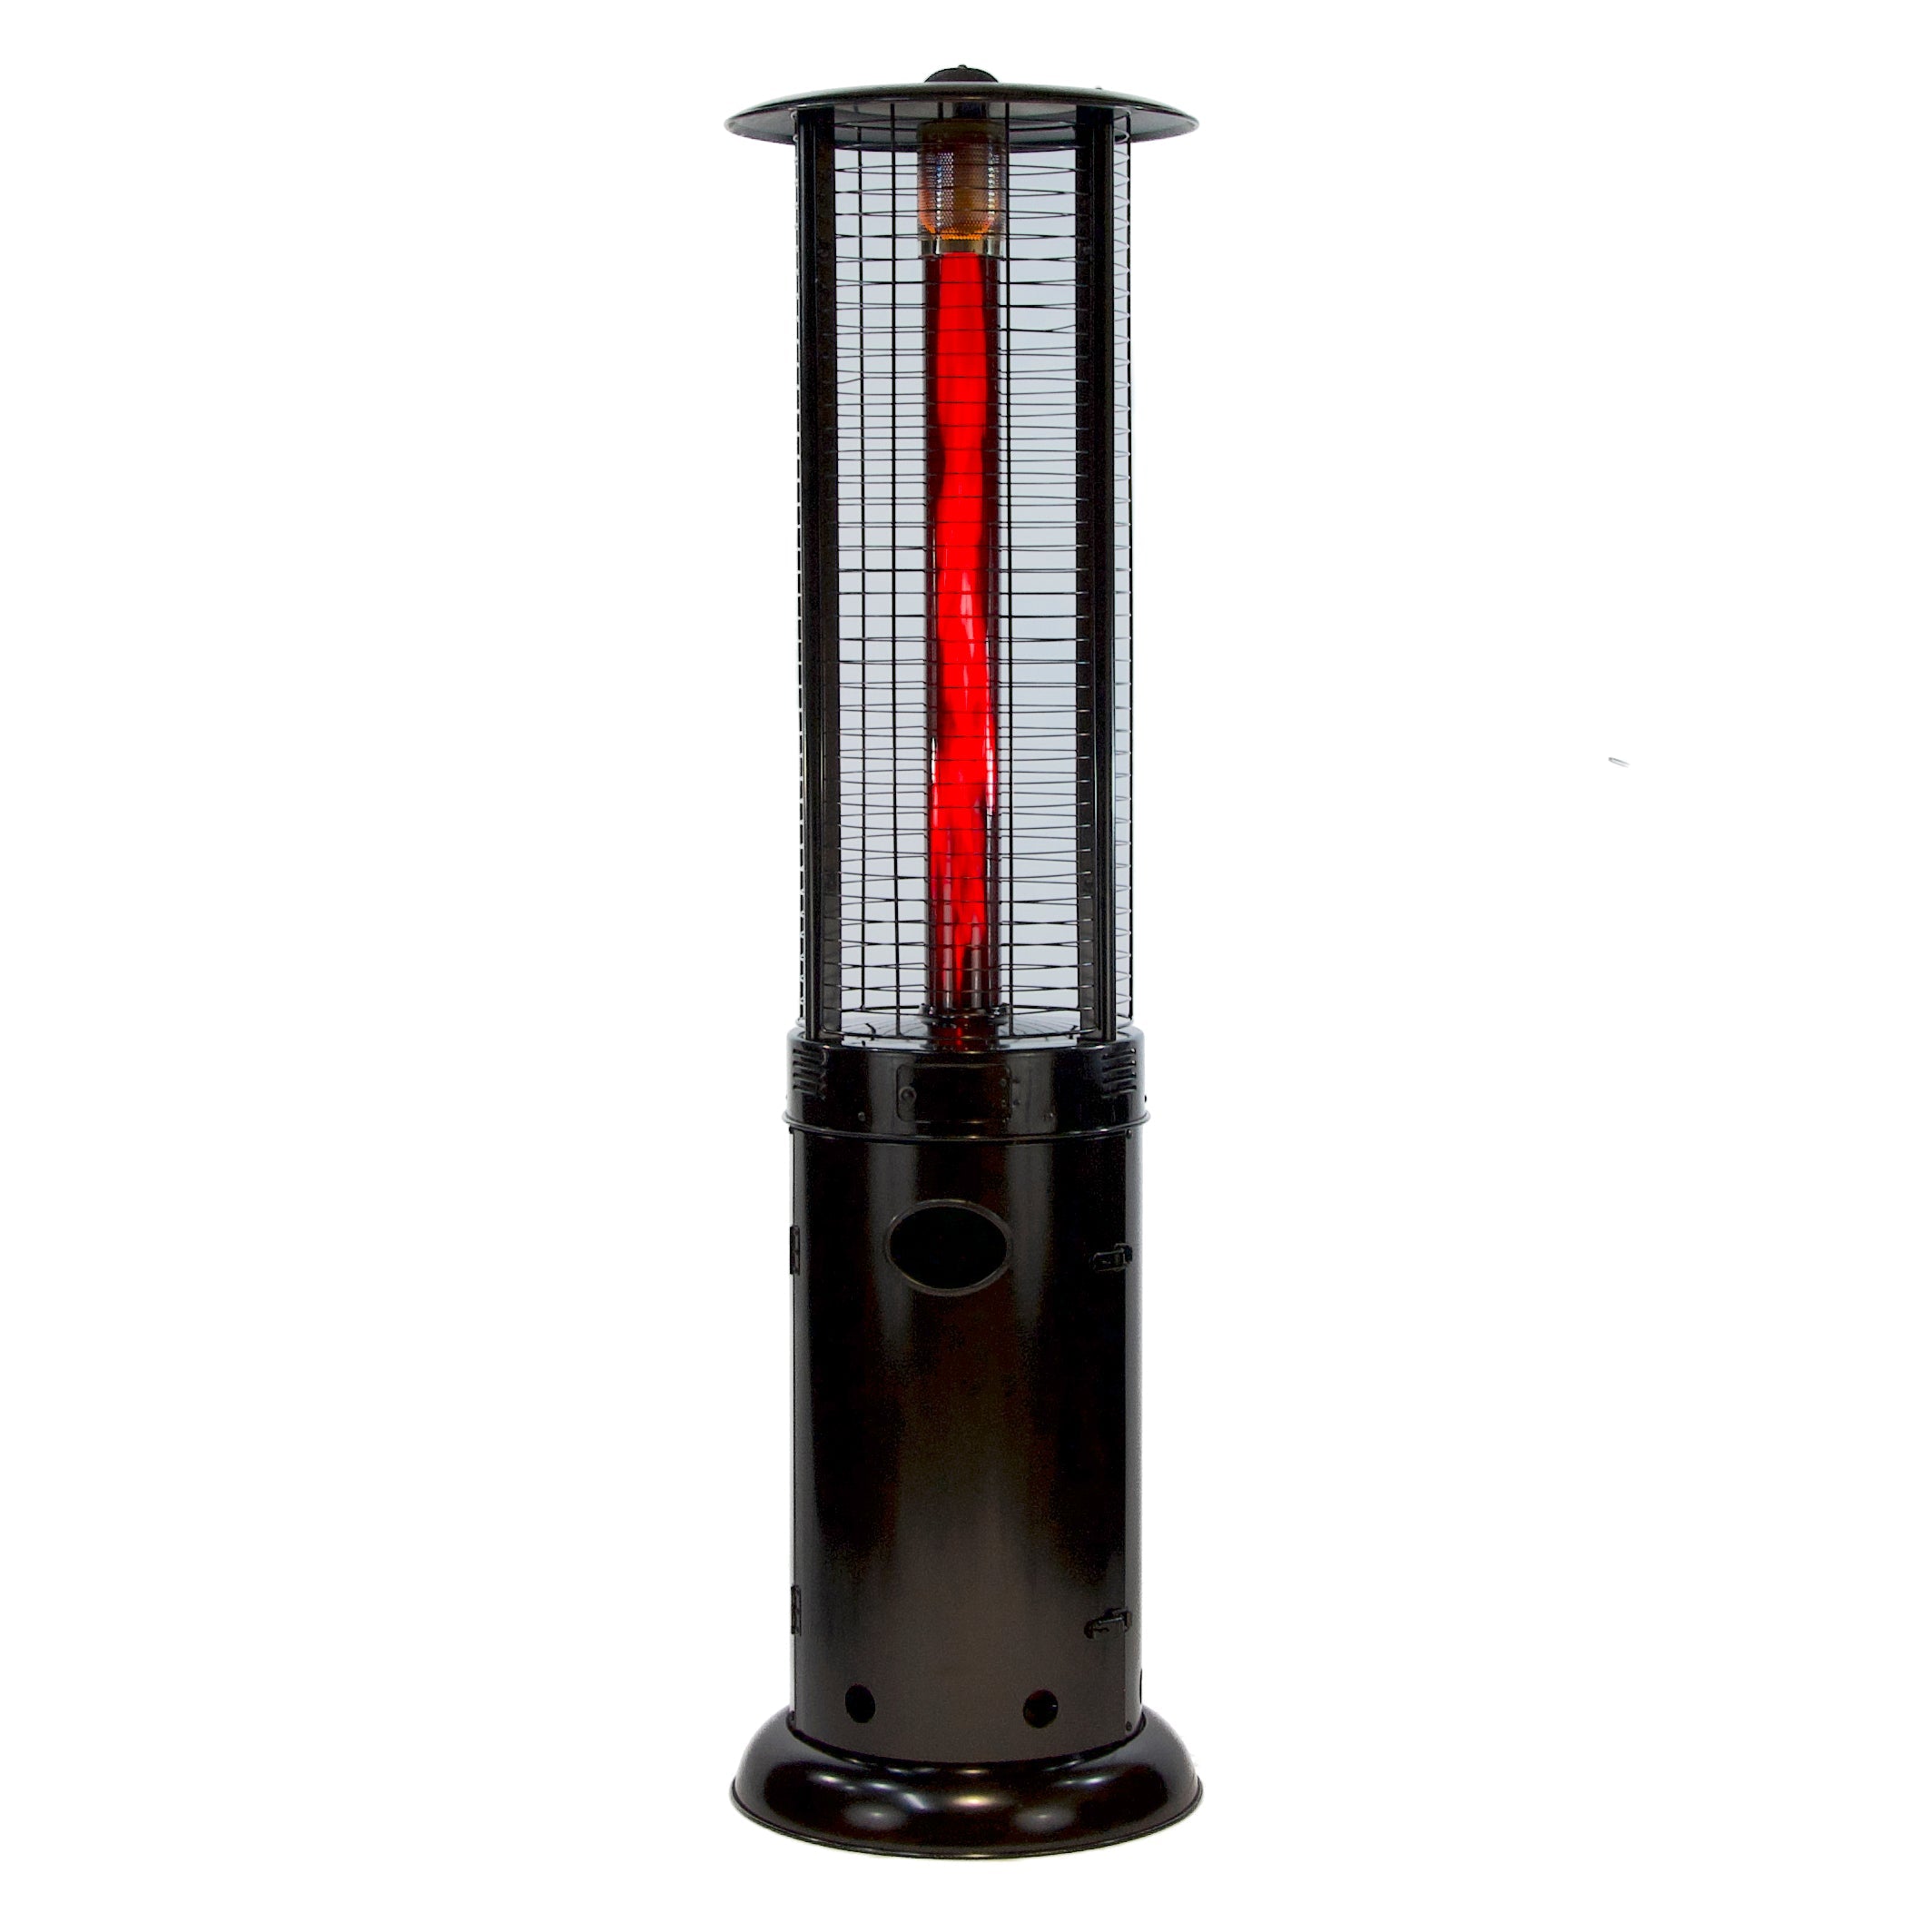 RADtec 80 Ellipse Flame Propane Patio Heater - Black with Ruby Glass 41,000 BTU  - 80-ELL-FLM-HT - Full View With Glow Fire